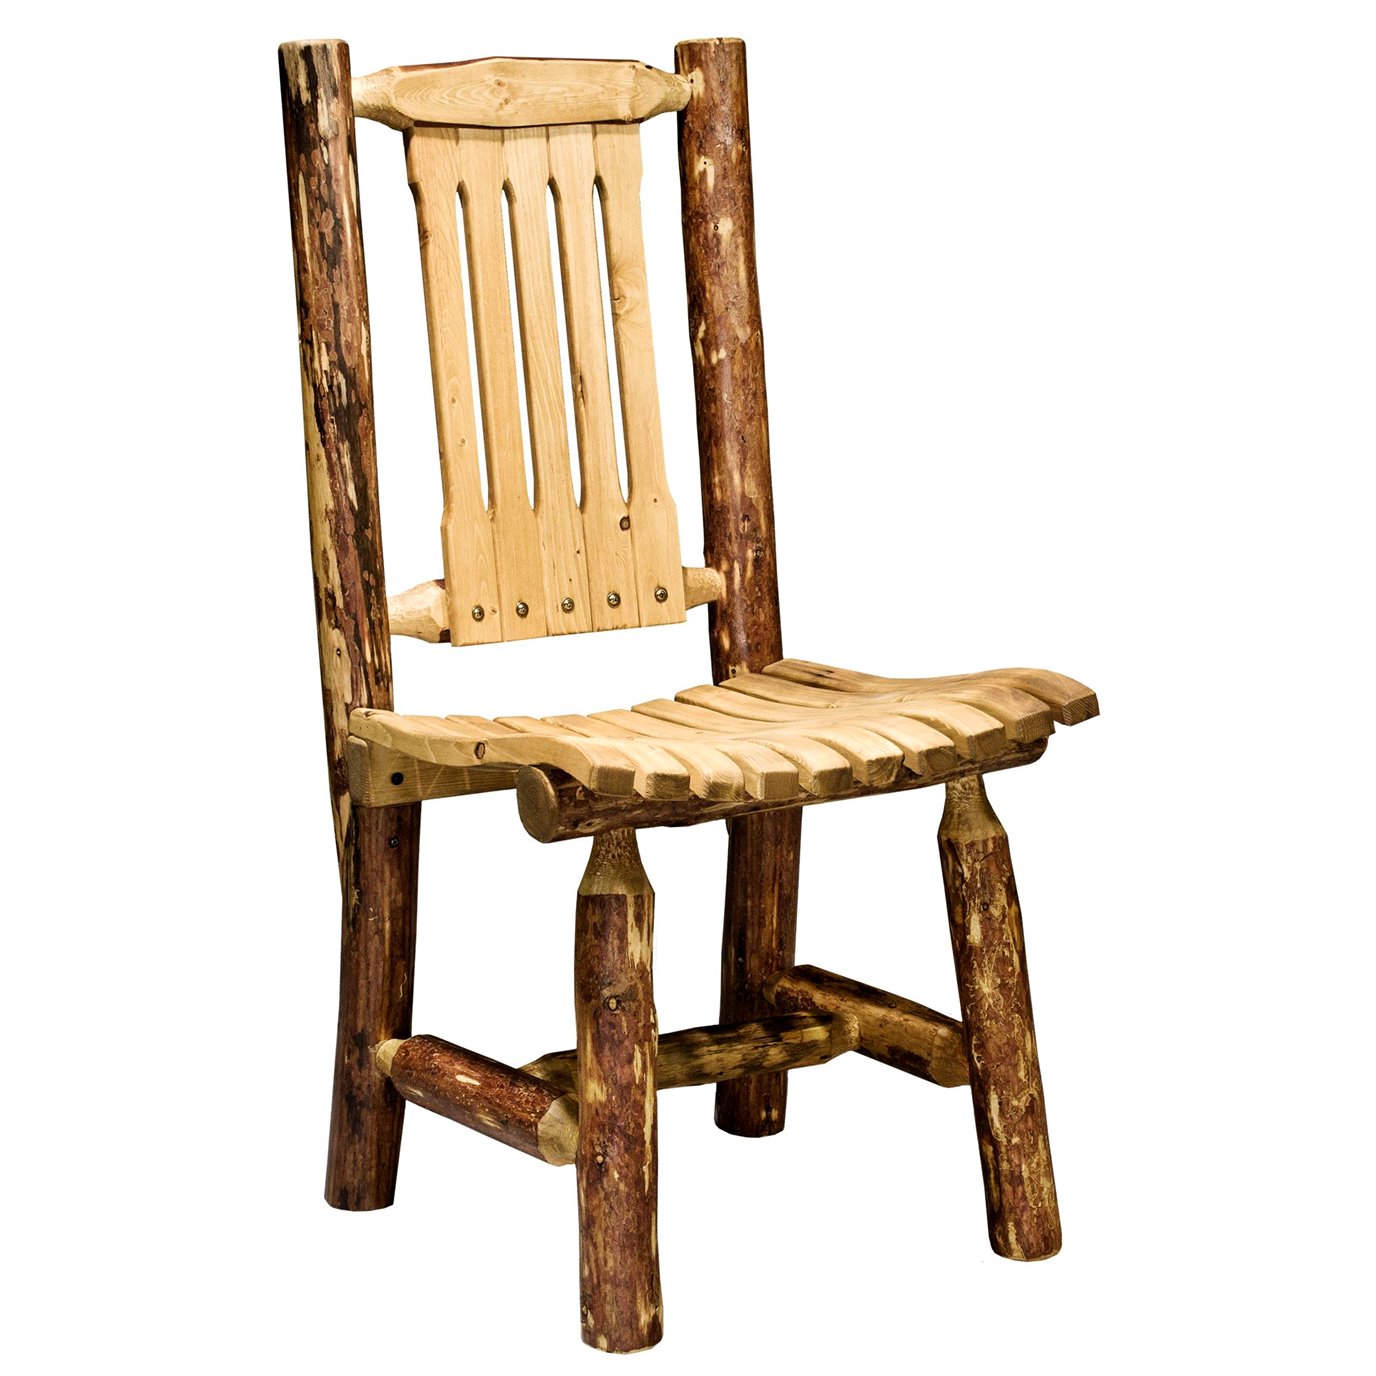 Glacier Patio Chair - Exterior Stain Finish